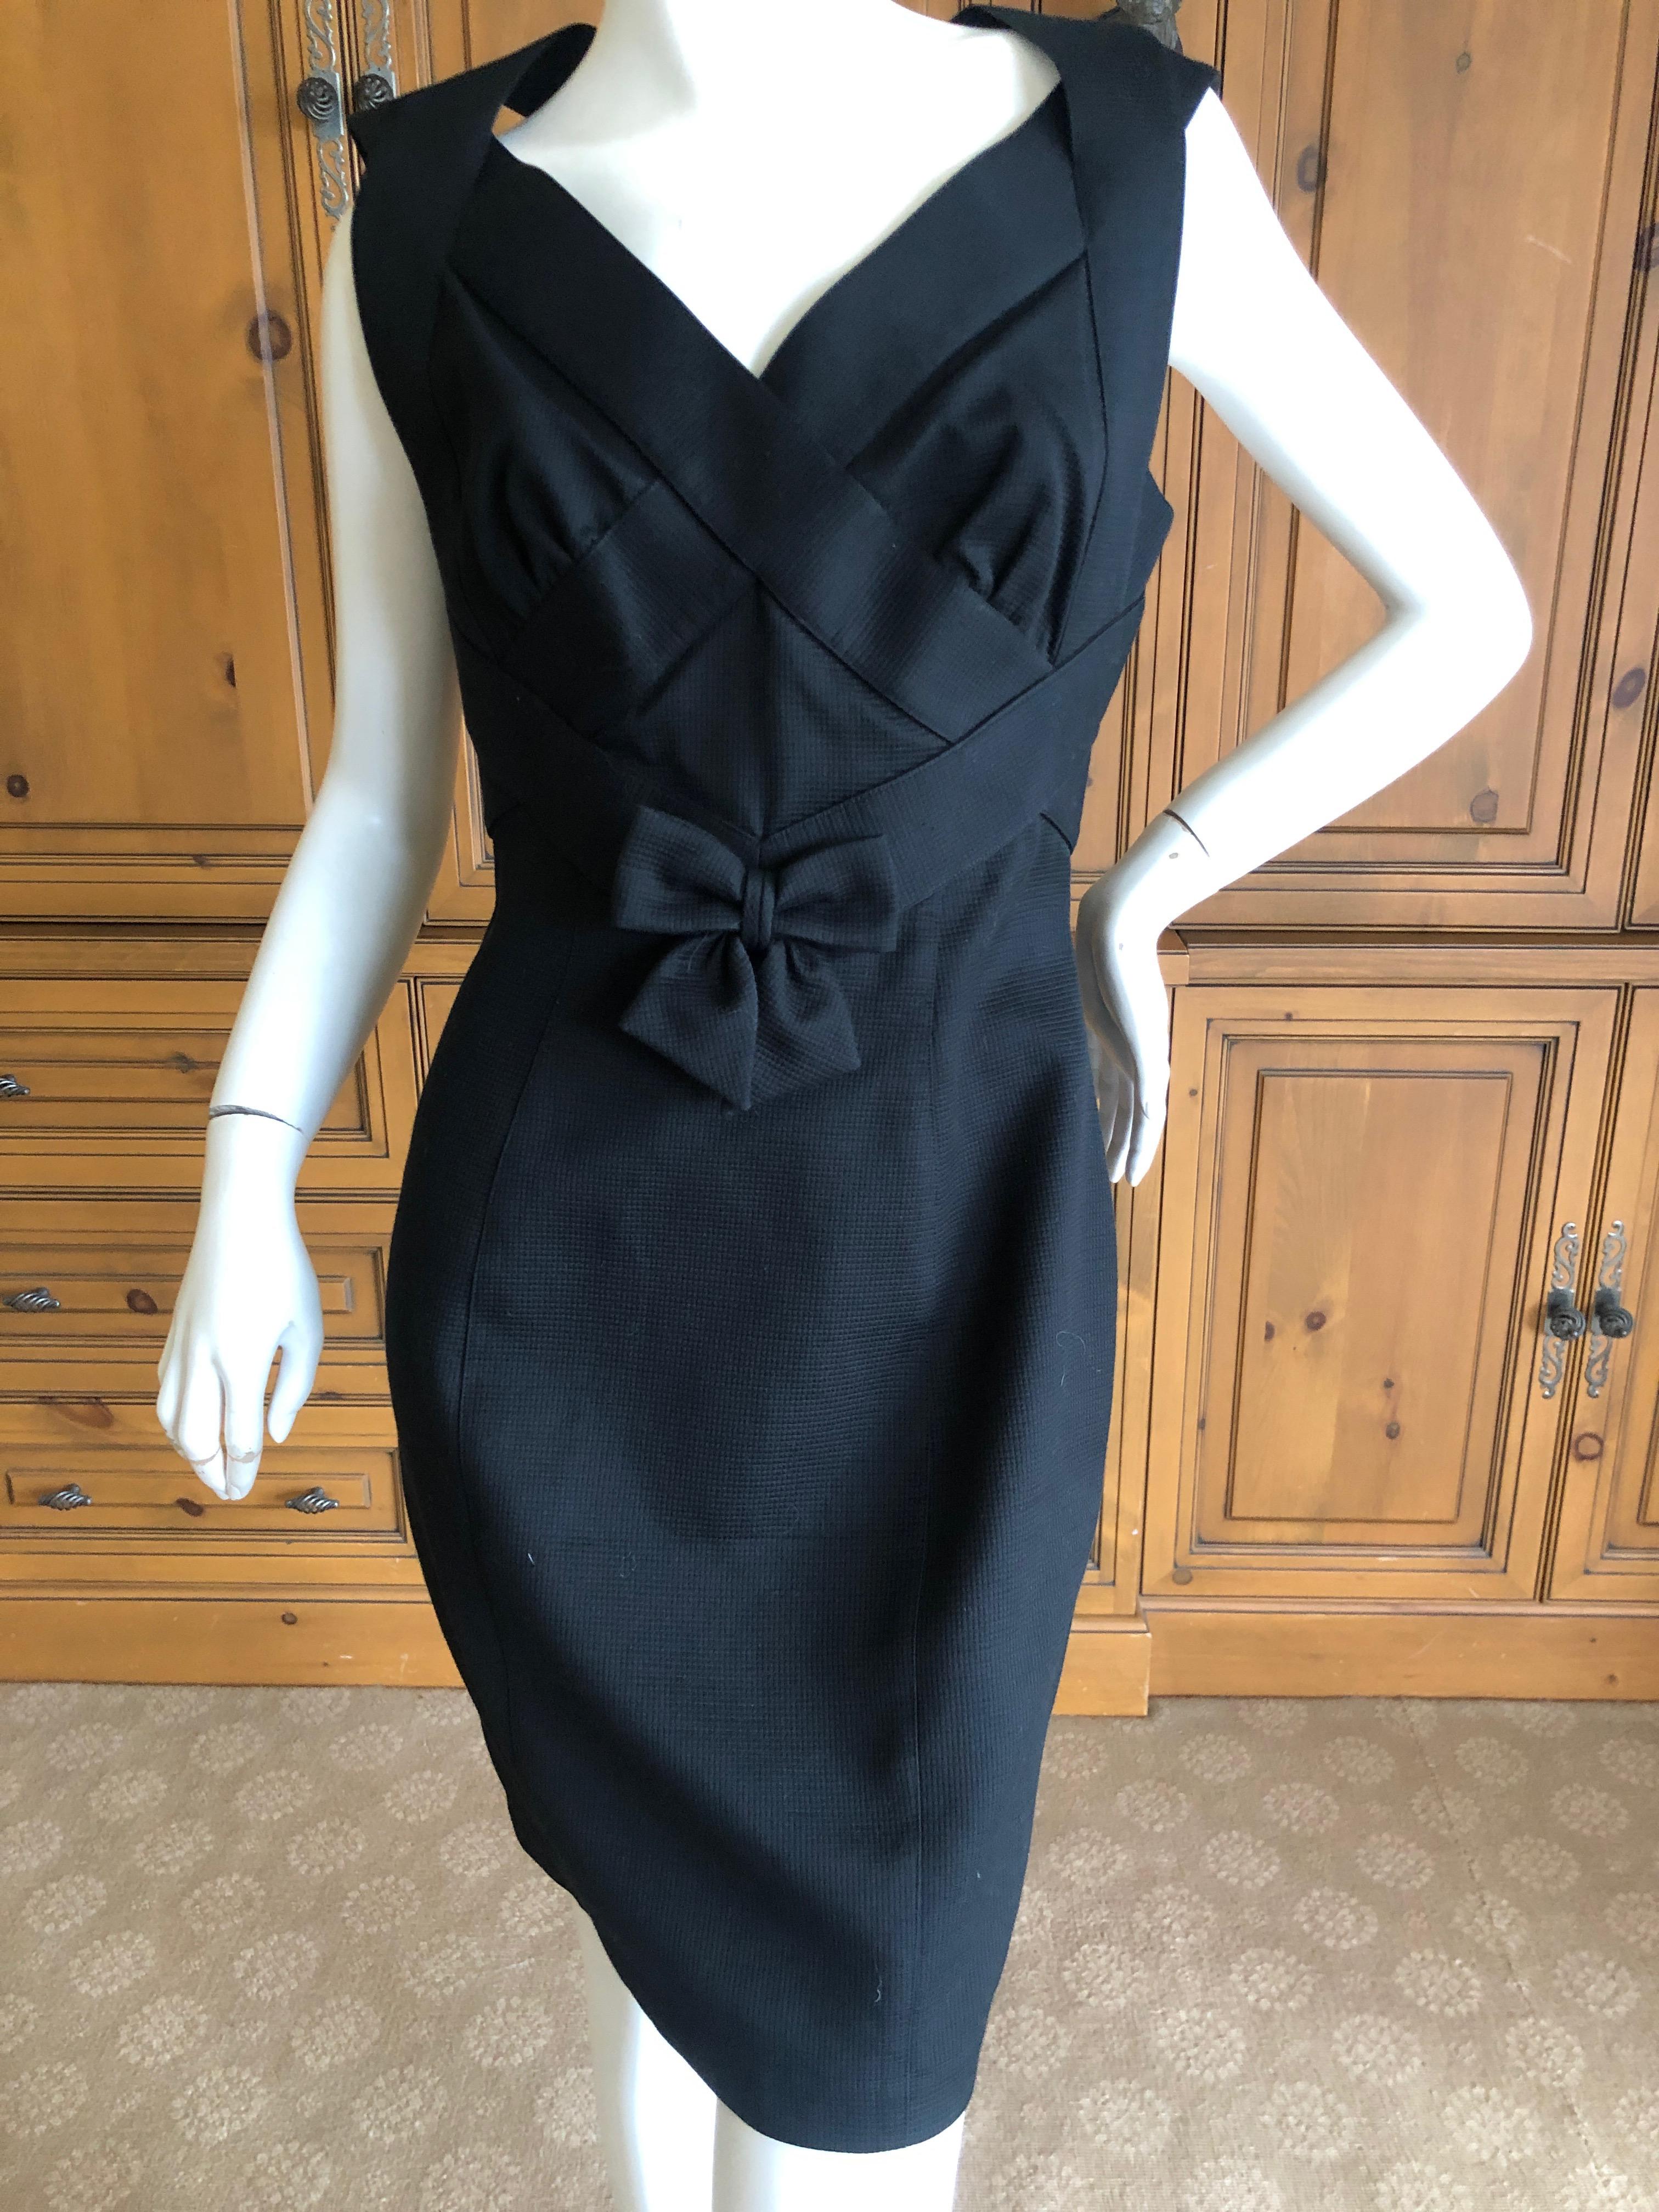 Thierry Mugler Elegant Vintage 80's Bow Accented Little Black Cross Back Dress  In Good Condition For Sale In Cloverdale, CA